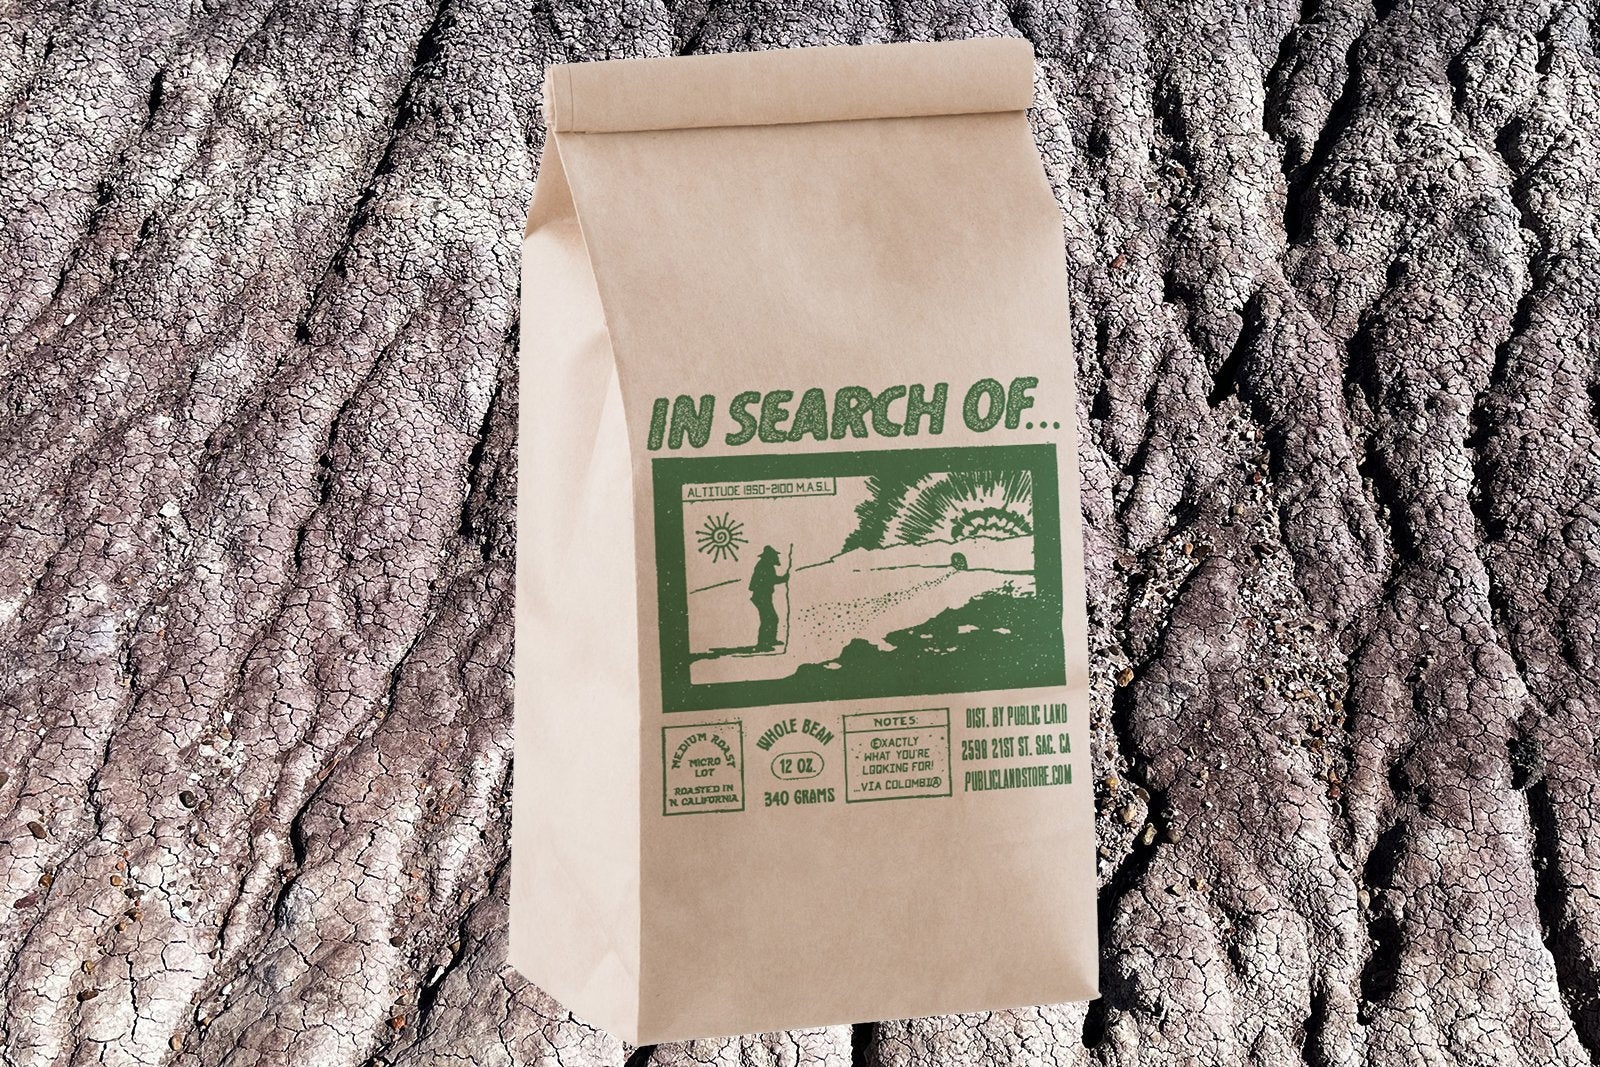 New coffee project IN SEARCH OF... now available online + in-store